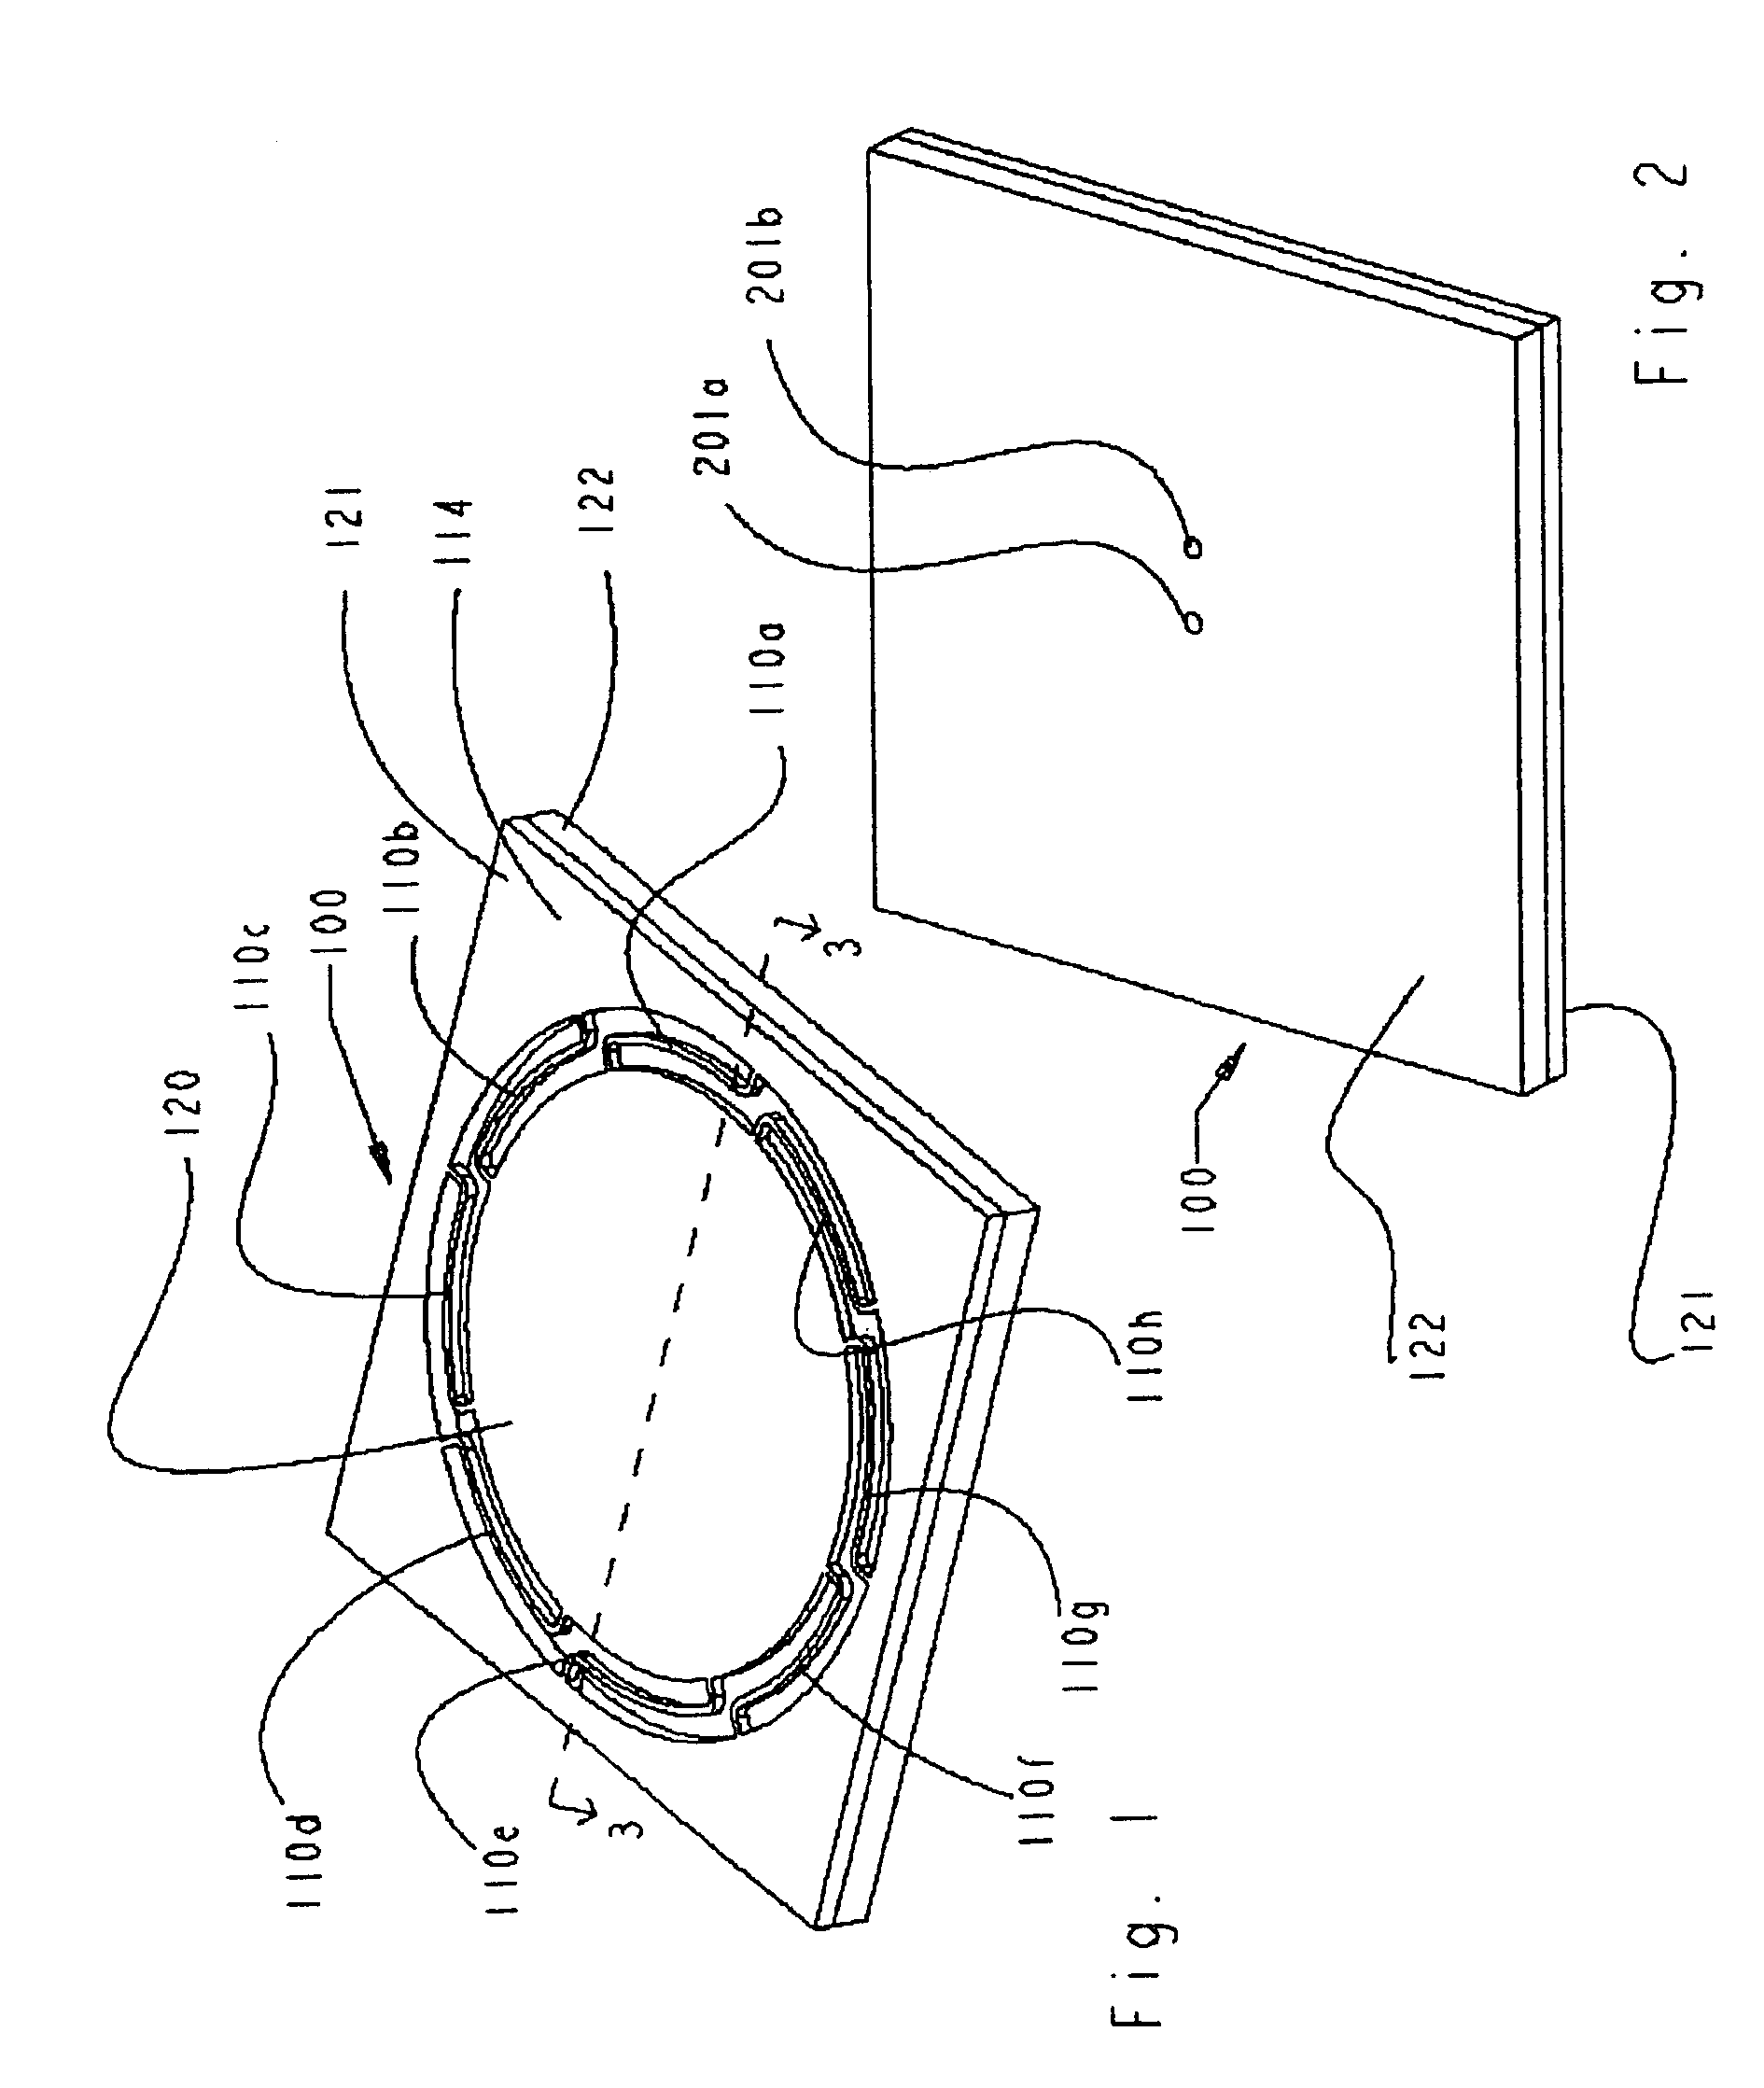 Gating apparatus and method of manufacture